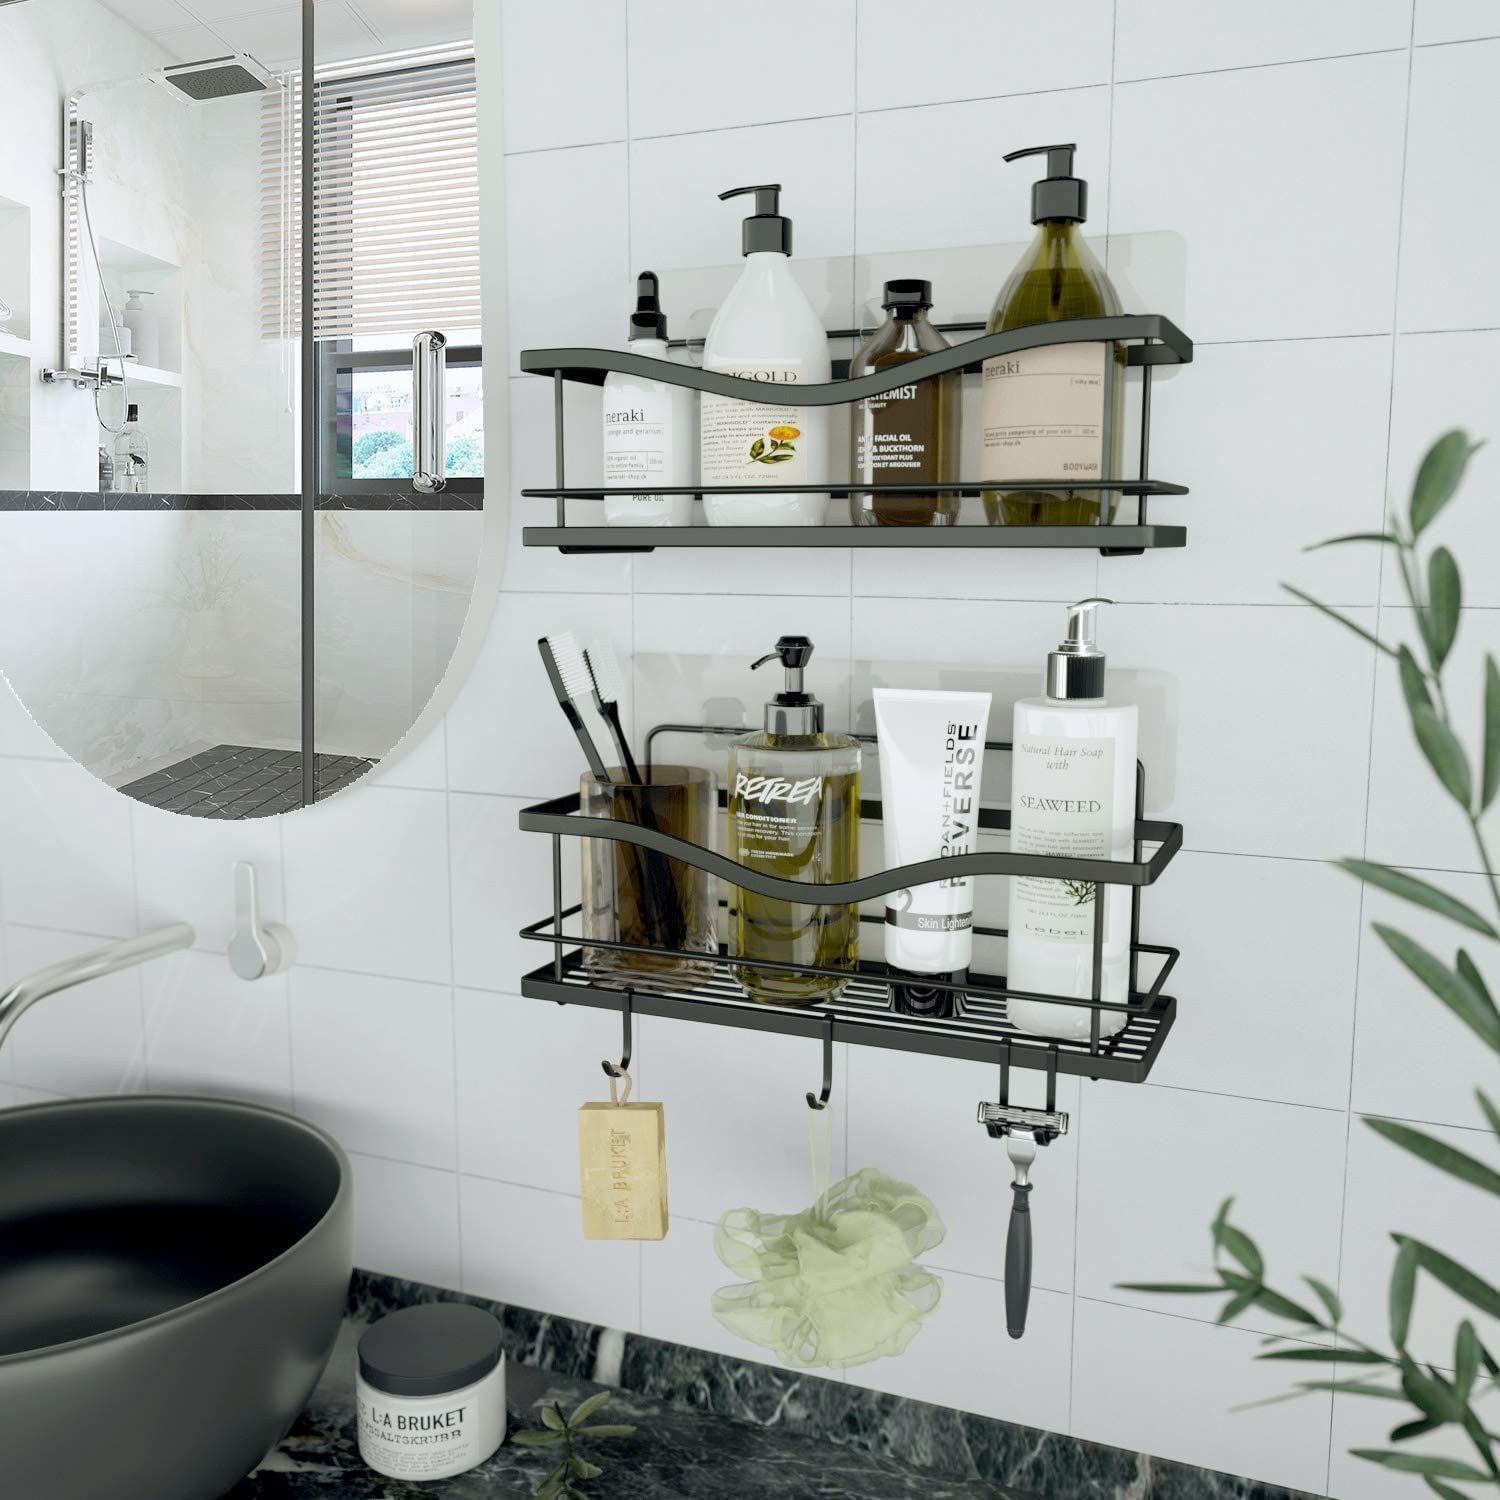 Every Bathroom—Or Kitchen, Or Shower—Needs These Viral Floating Shelves From TikTok